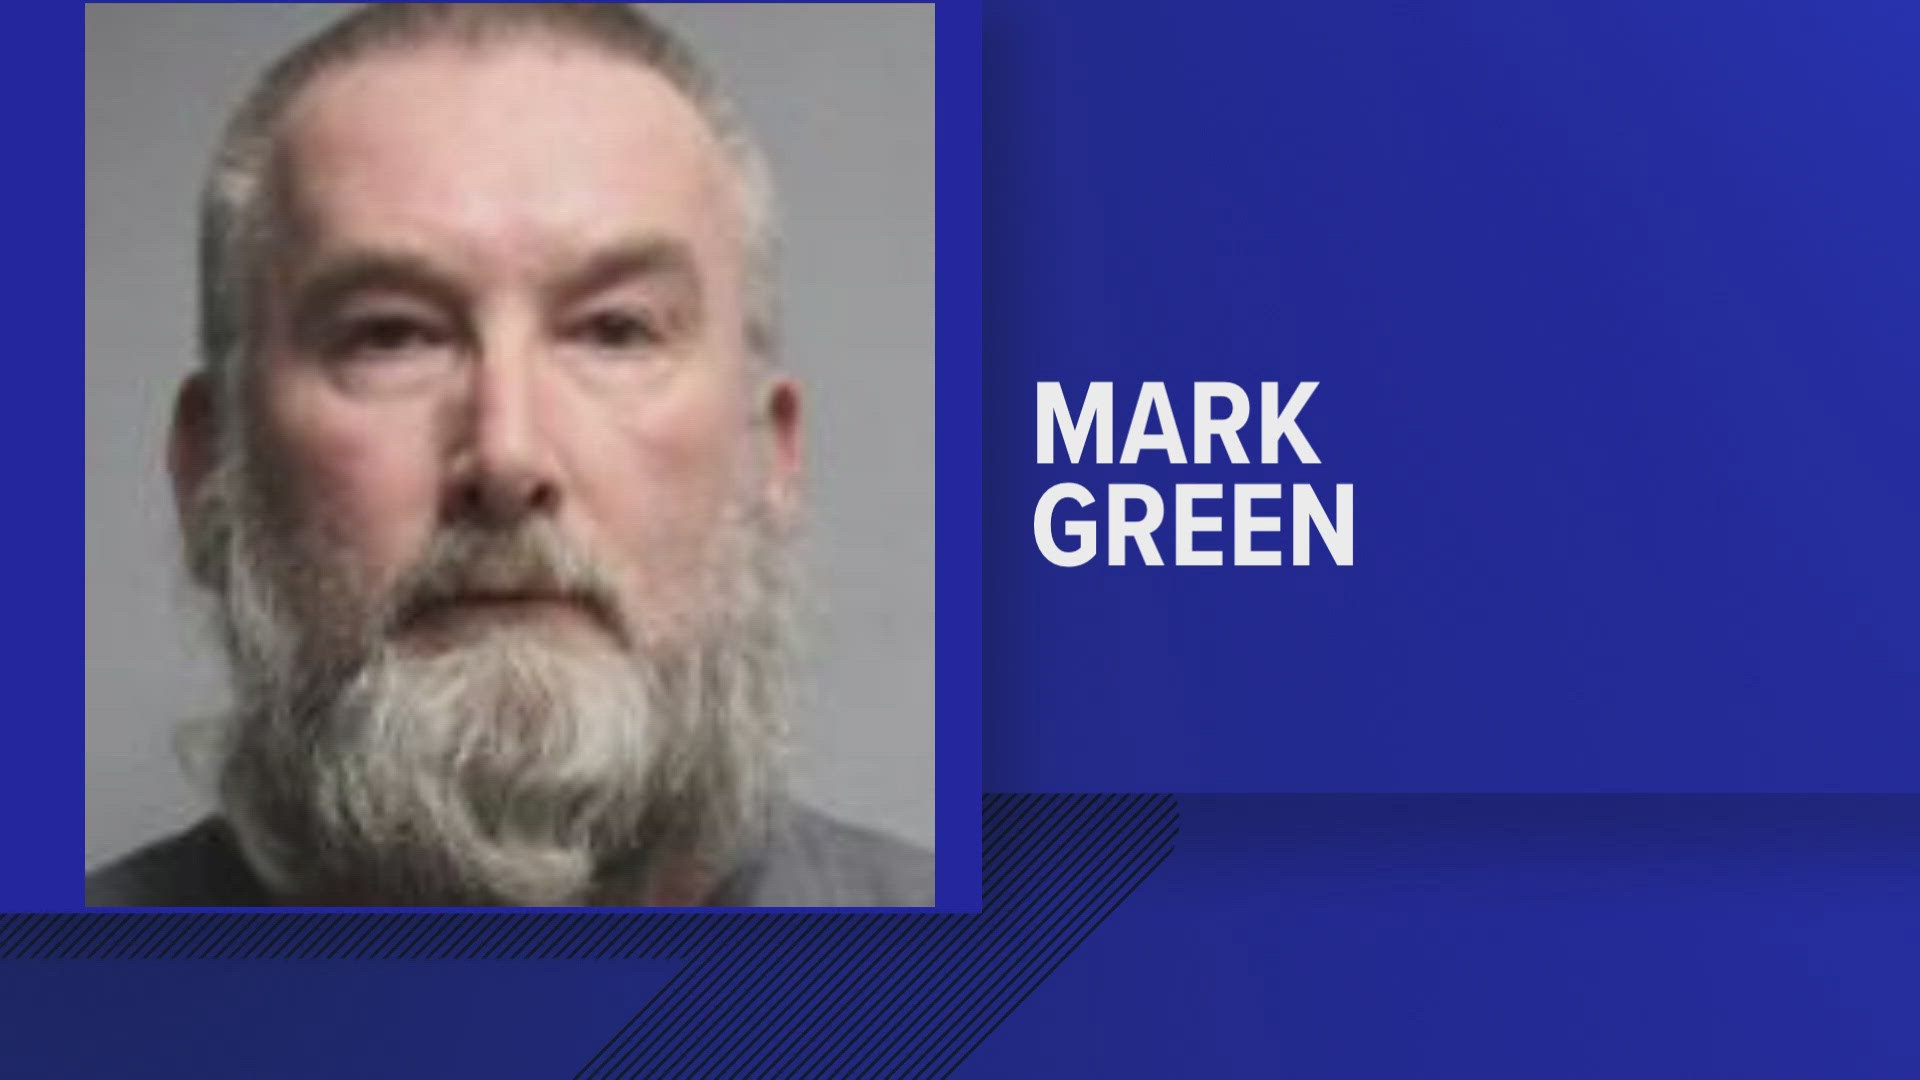 Mark Green, 56, was sentenced in U.S. District Court for sexually exploiting minors and possessing child sexual abuse material.